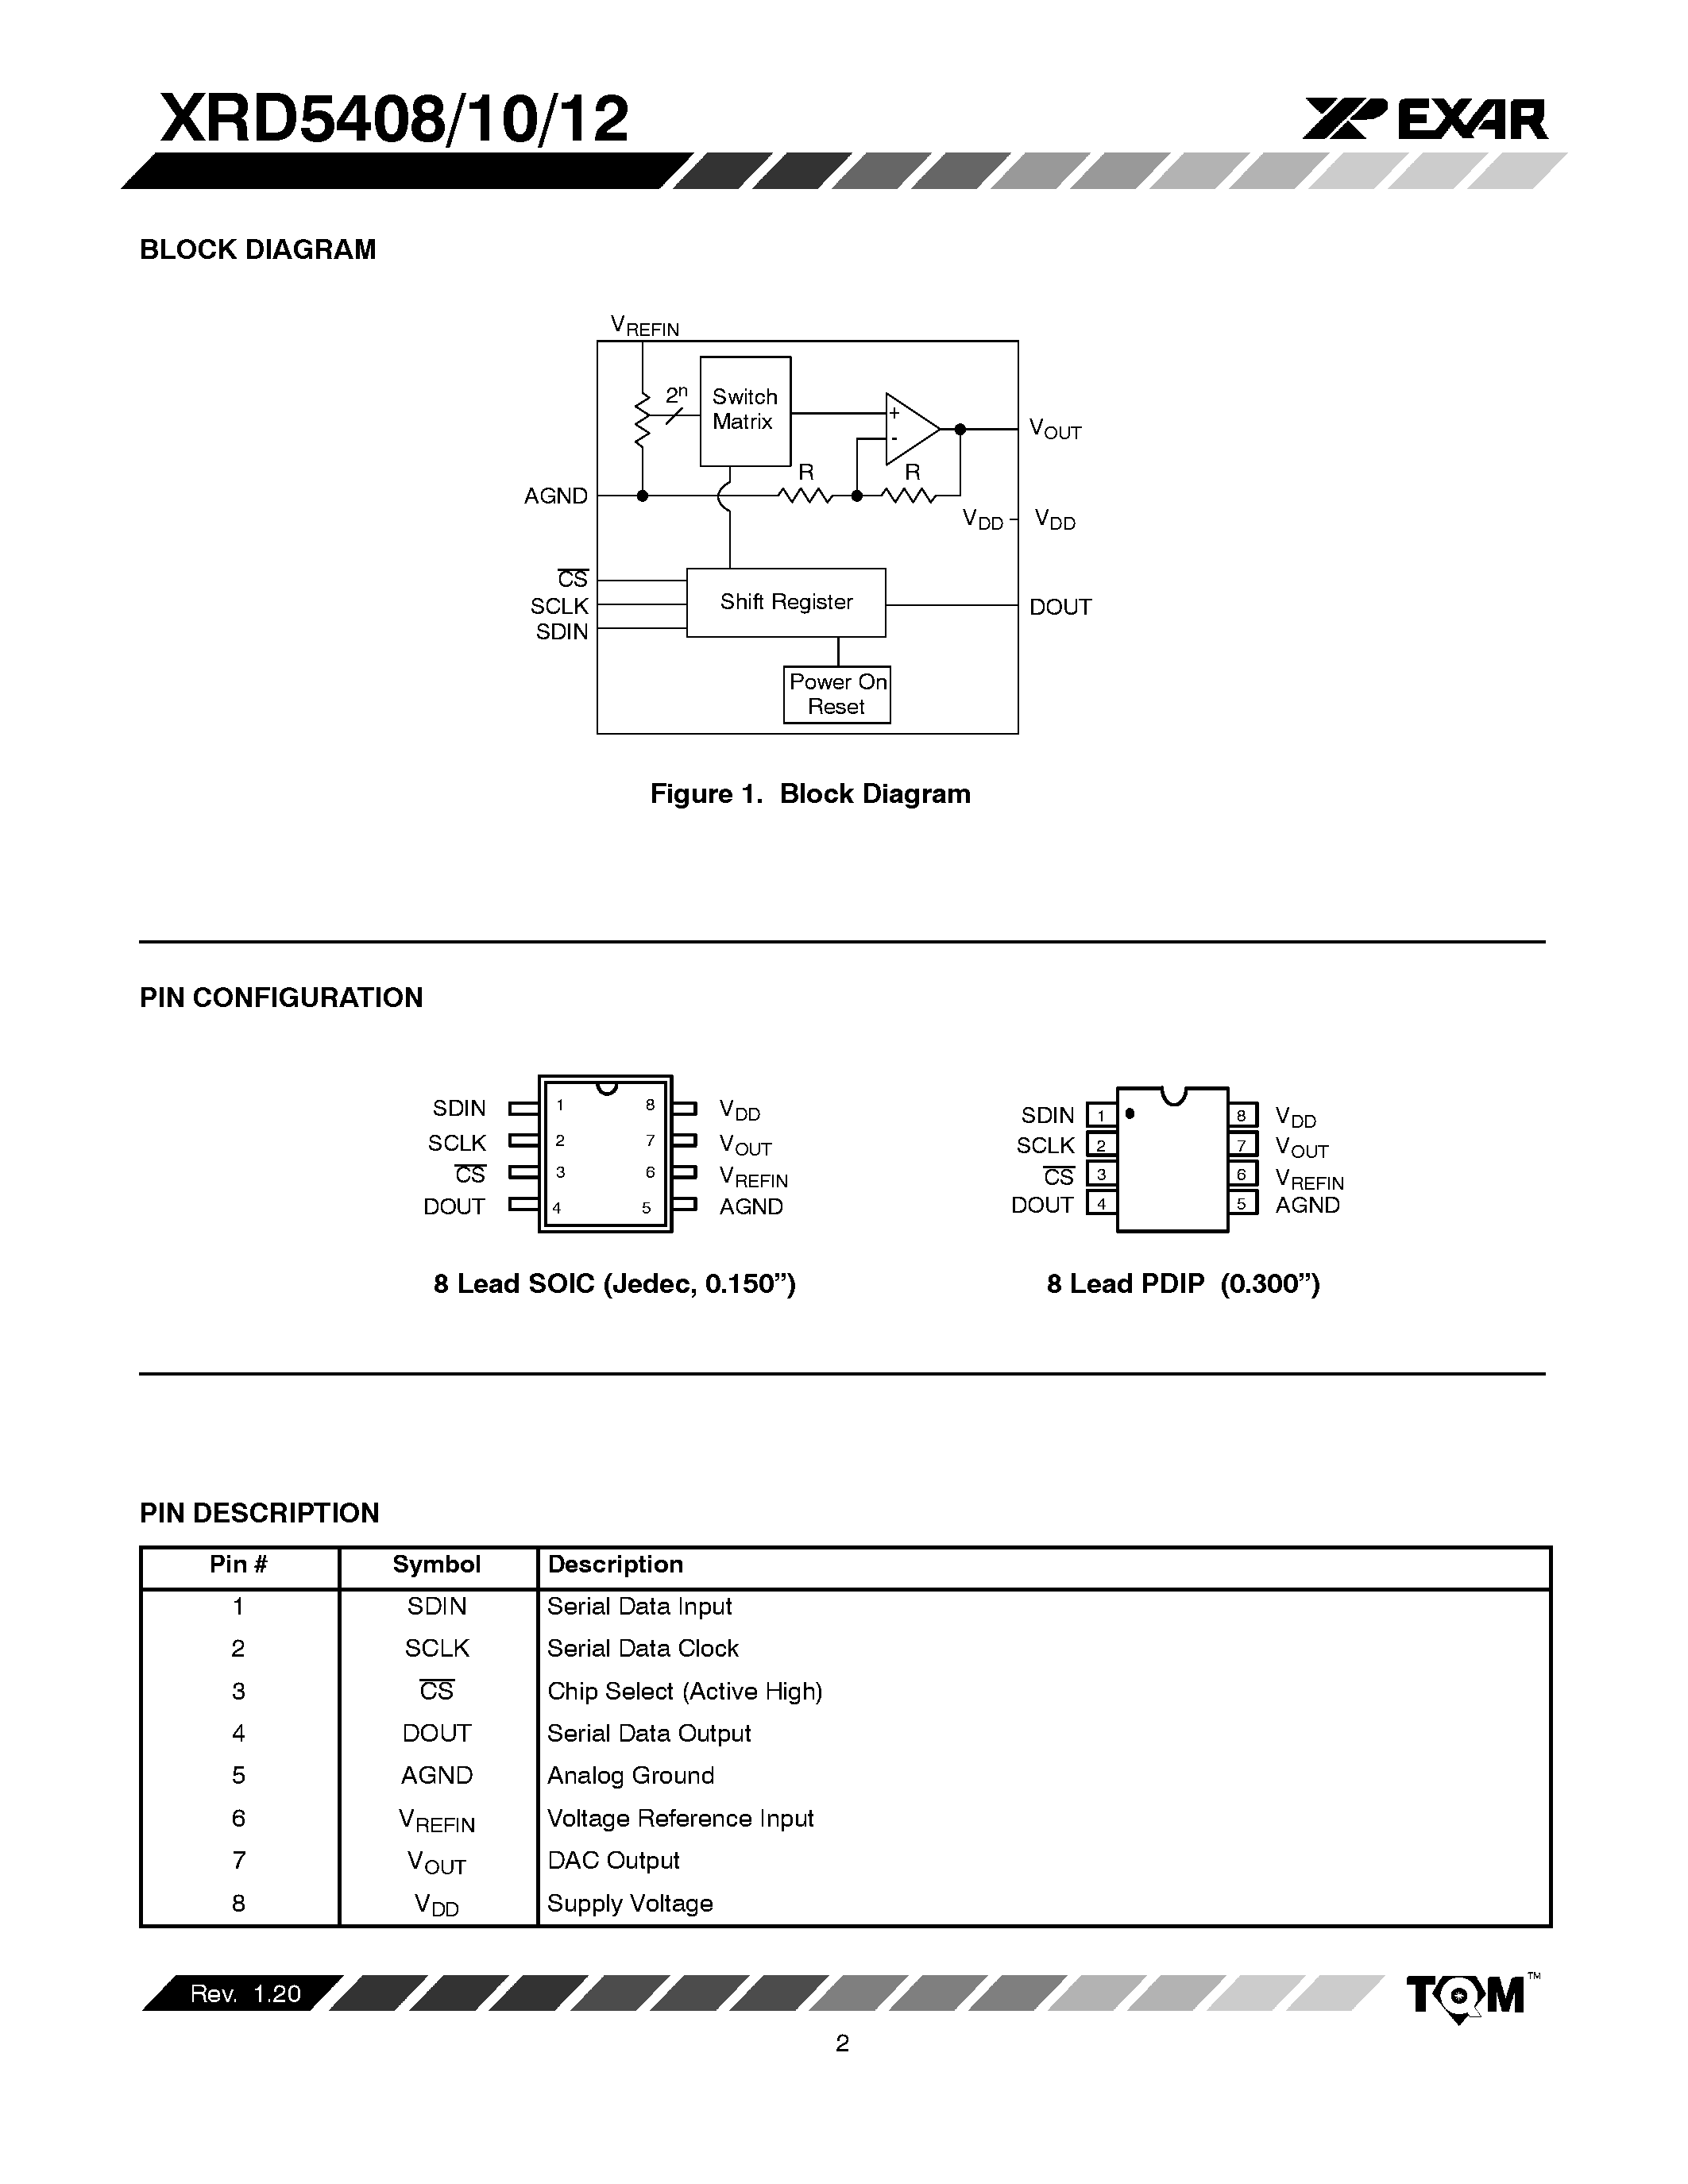 Datasheet XRD5408AID - 5V/ Low Power/ Voltage Output Serial 8/10/12-Bit DAC Family page 2